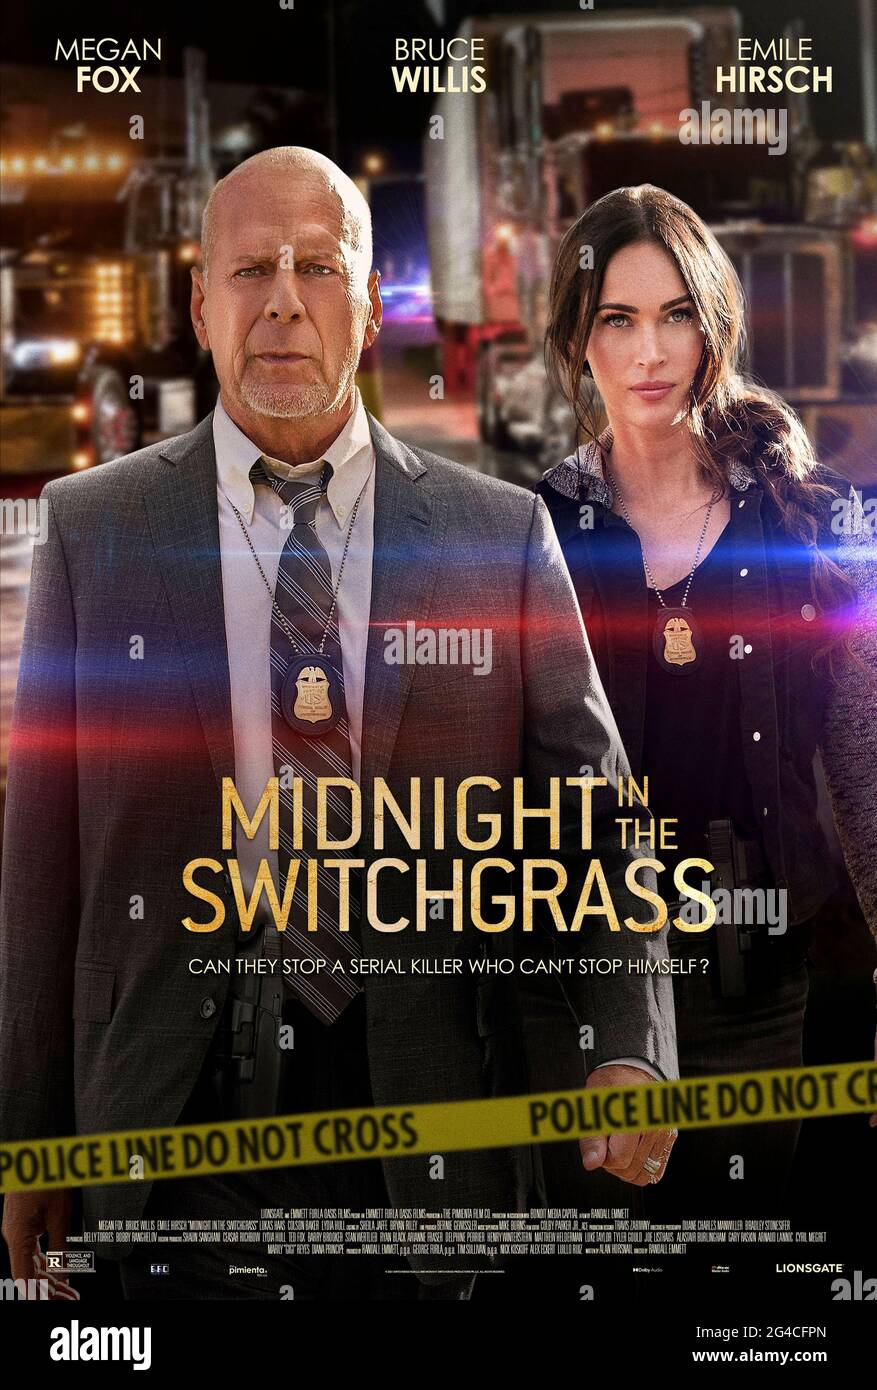 Midnight in the Switchgrass (2021) directed by Randall Emmett and starring Megan Fox, Bruce Willis and Emile Hirsch. An FBI agent and Florida State officer team up to investigate a string of unsolved murder cases. Stock Photo